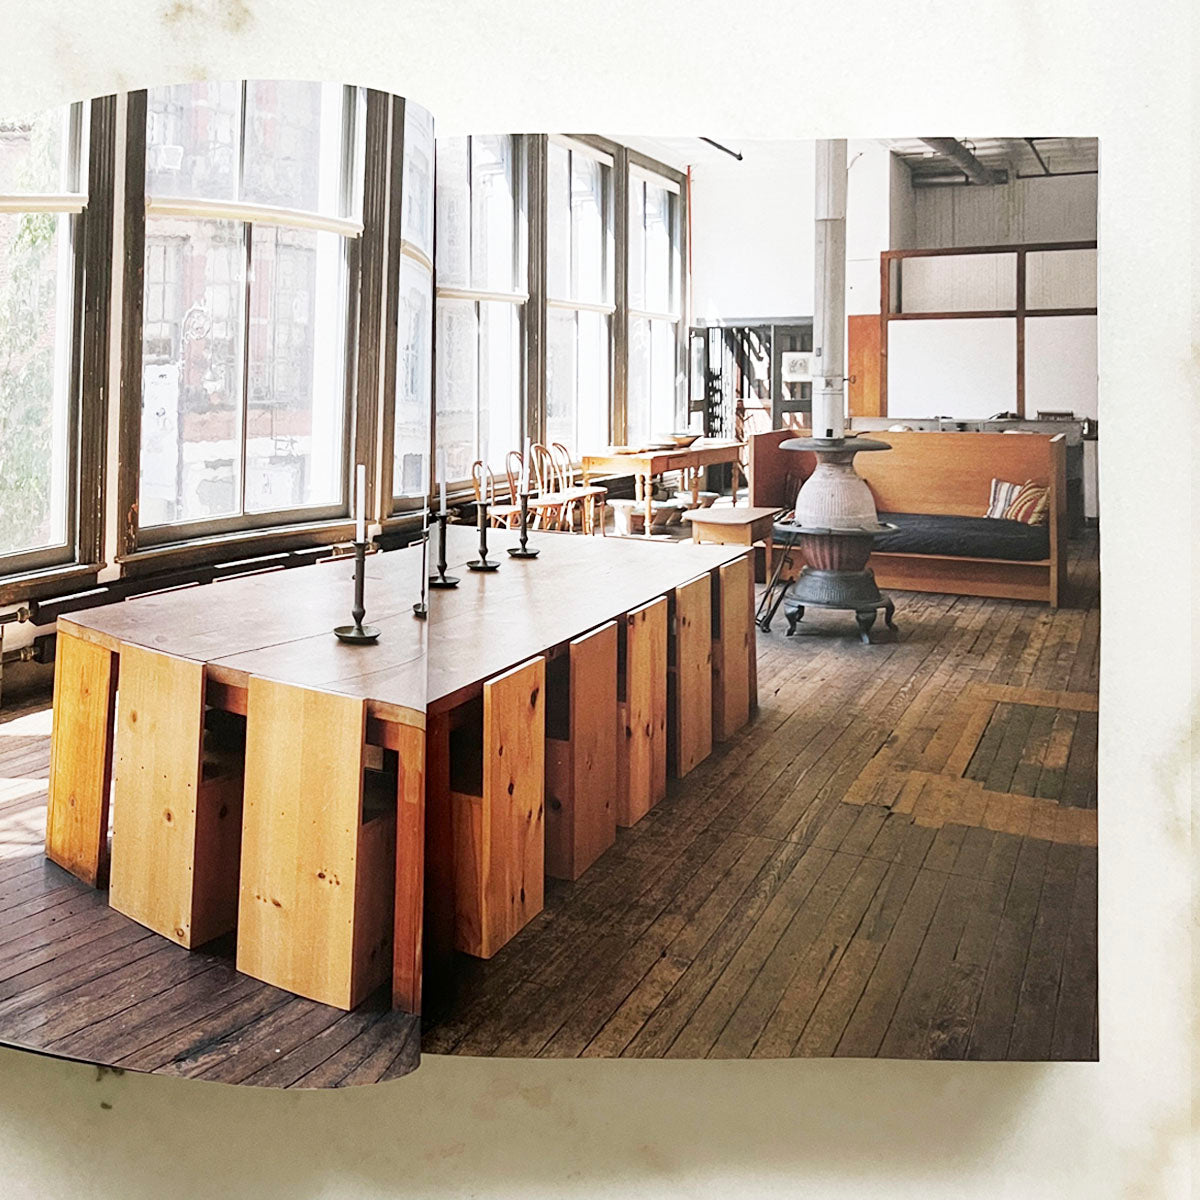 Donald Judd Spaces